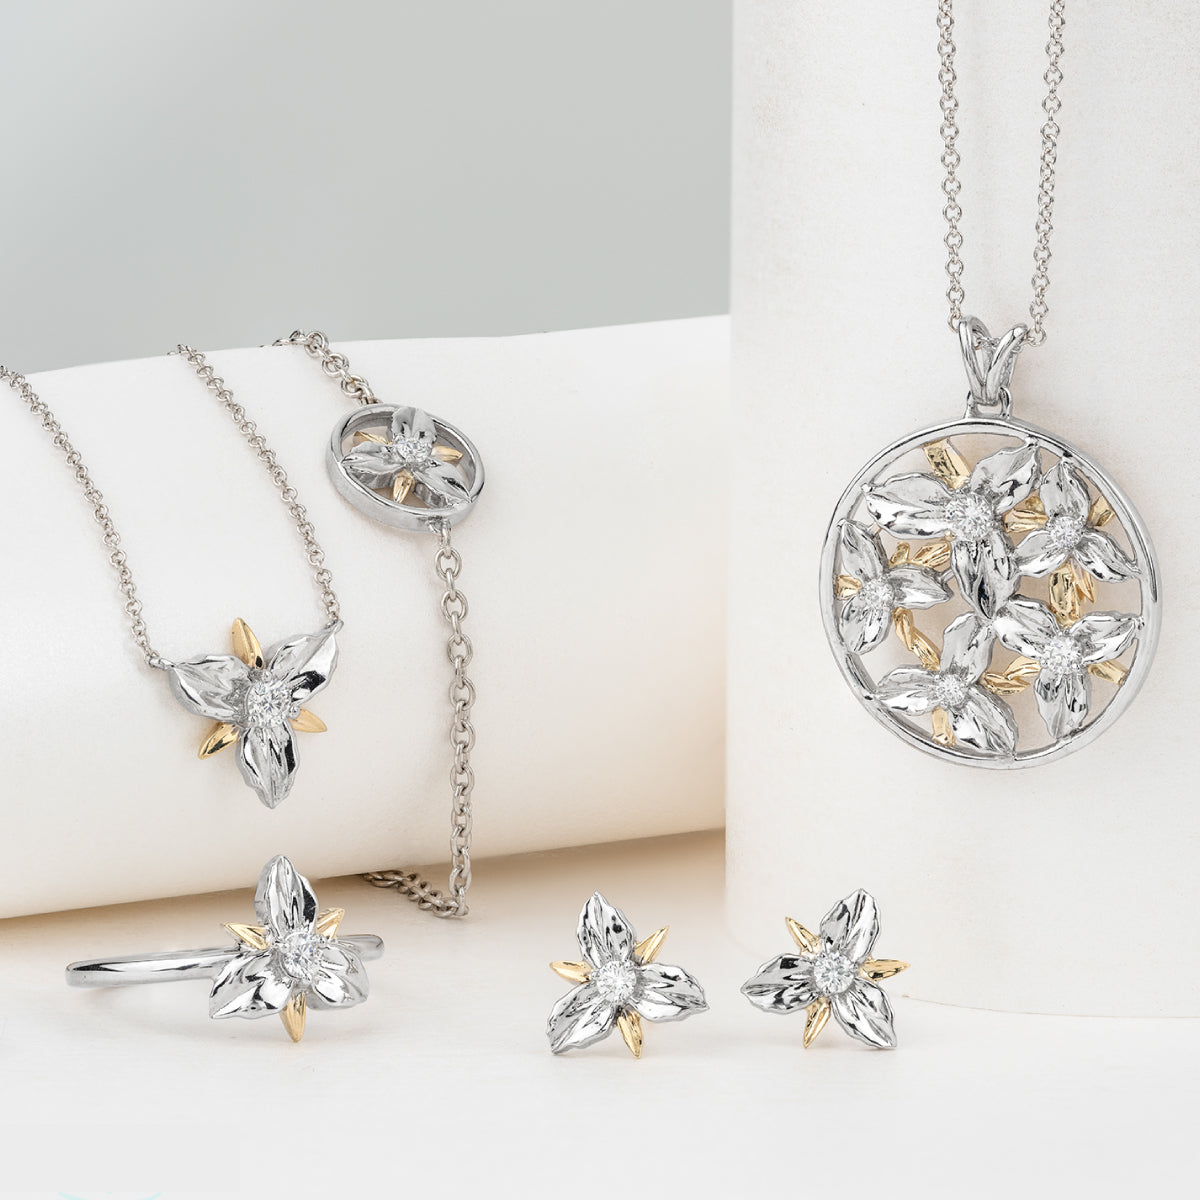 Ontario Trillium Jewellery Set by Shelly Pudy for Maple Leaf Diamonds